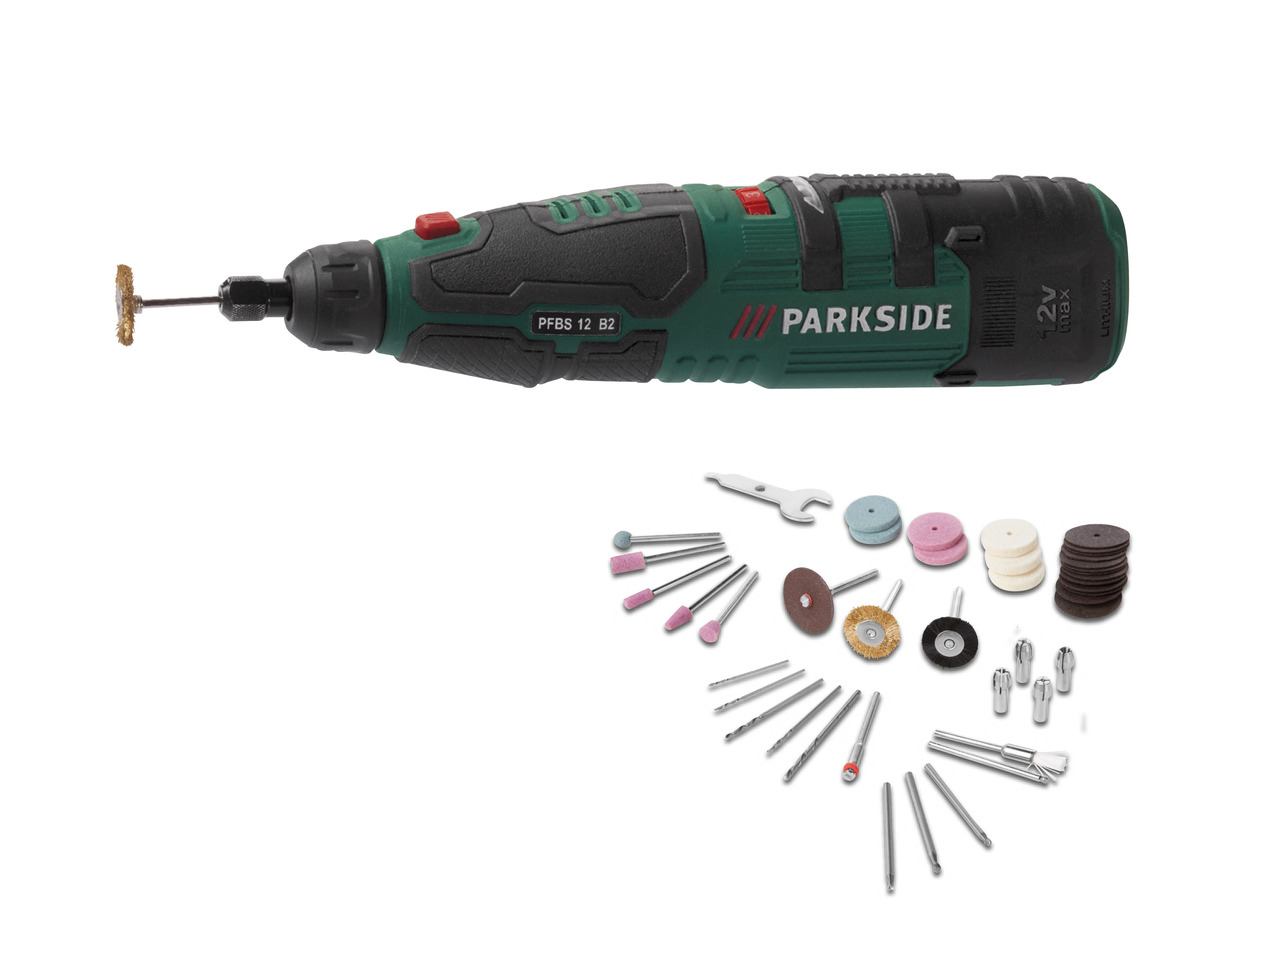 Parkside 12V Cordless Rotary Tool with Accessories1